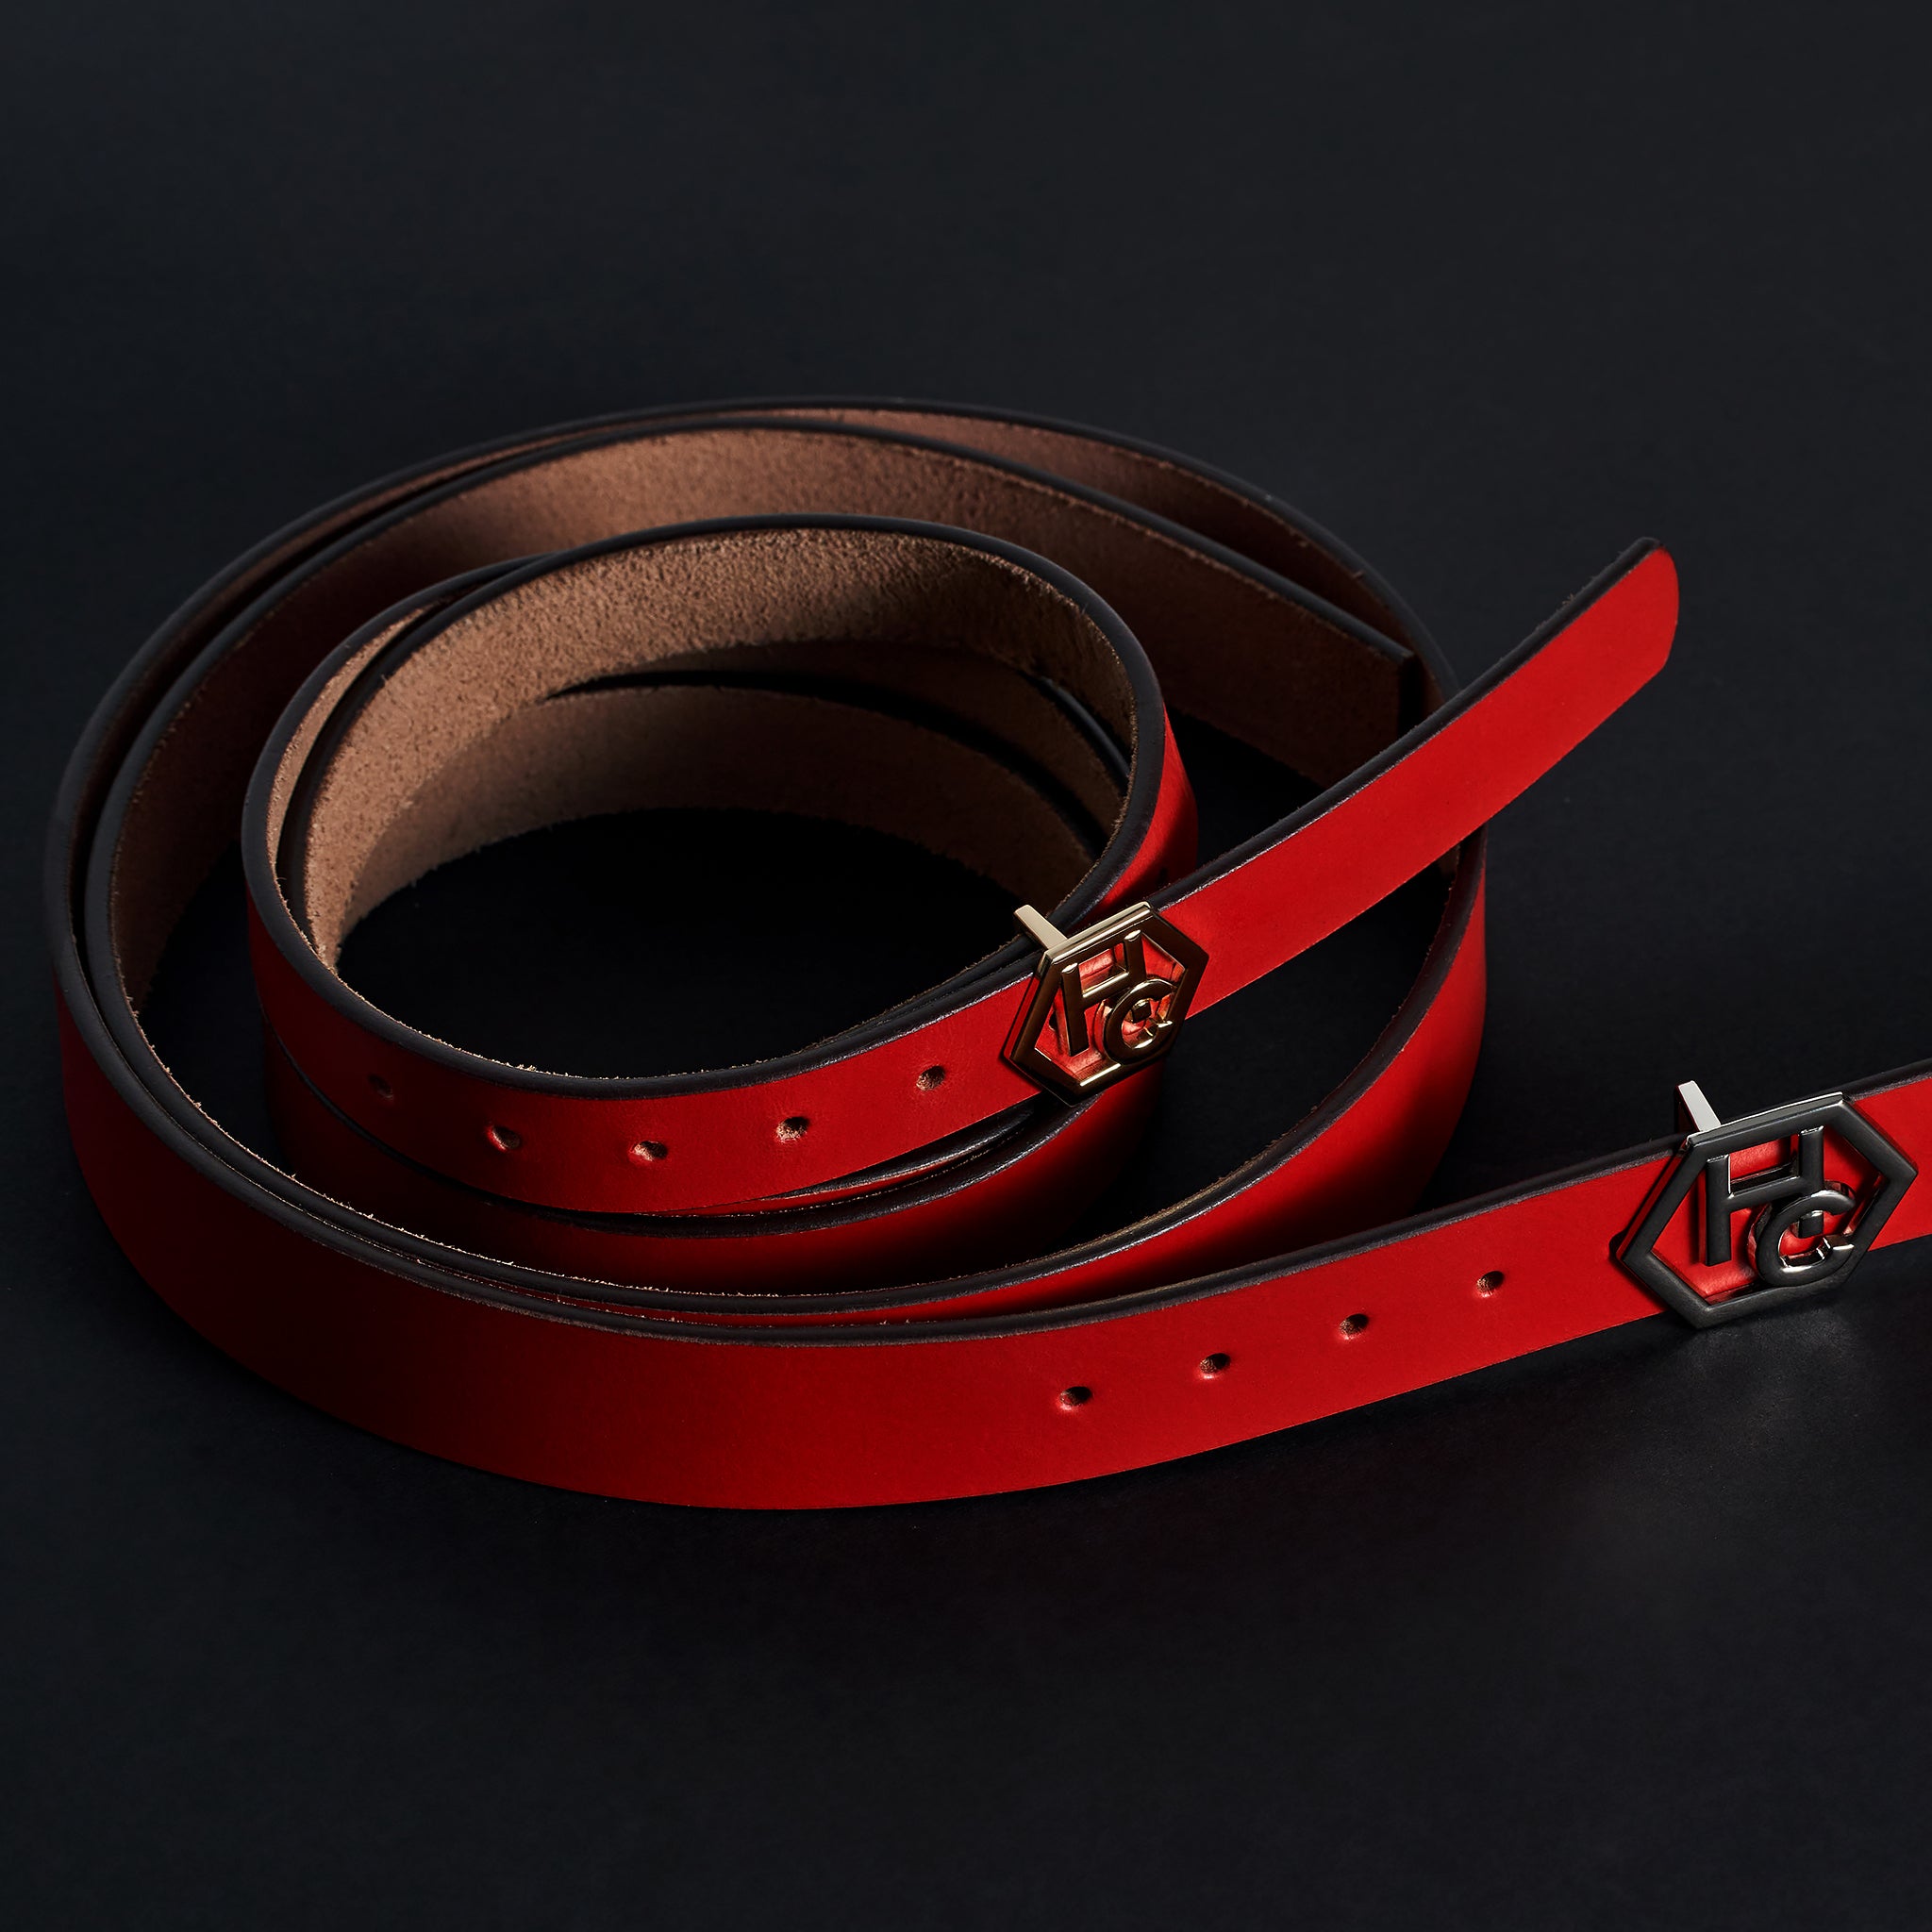 Hedonist Chicago Seamless Red Leather Belt 1.3" 32381329965207